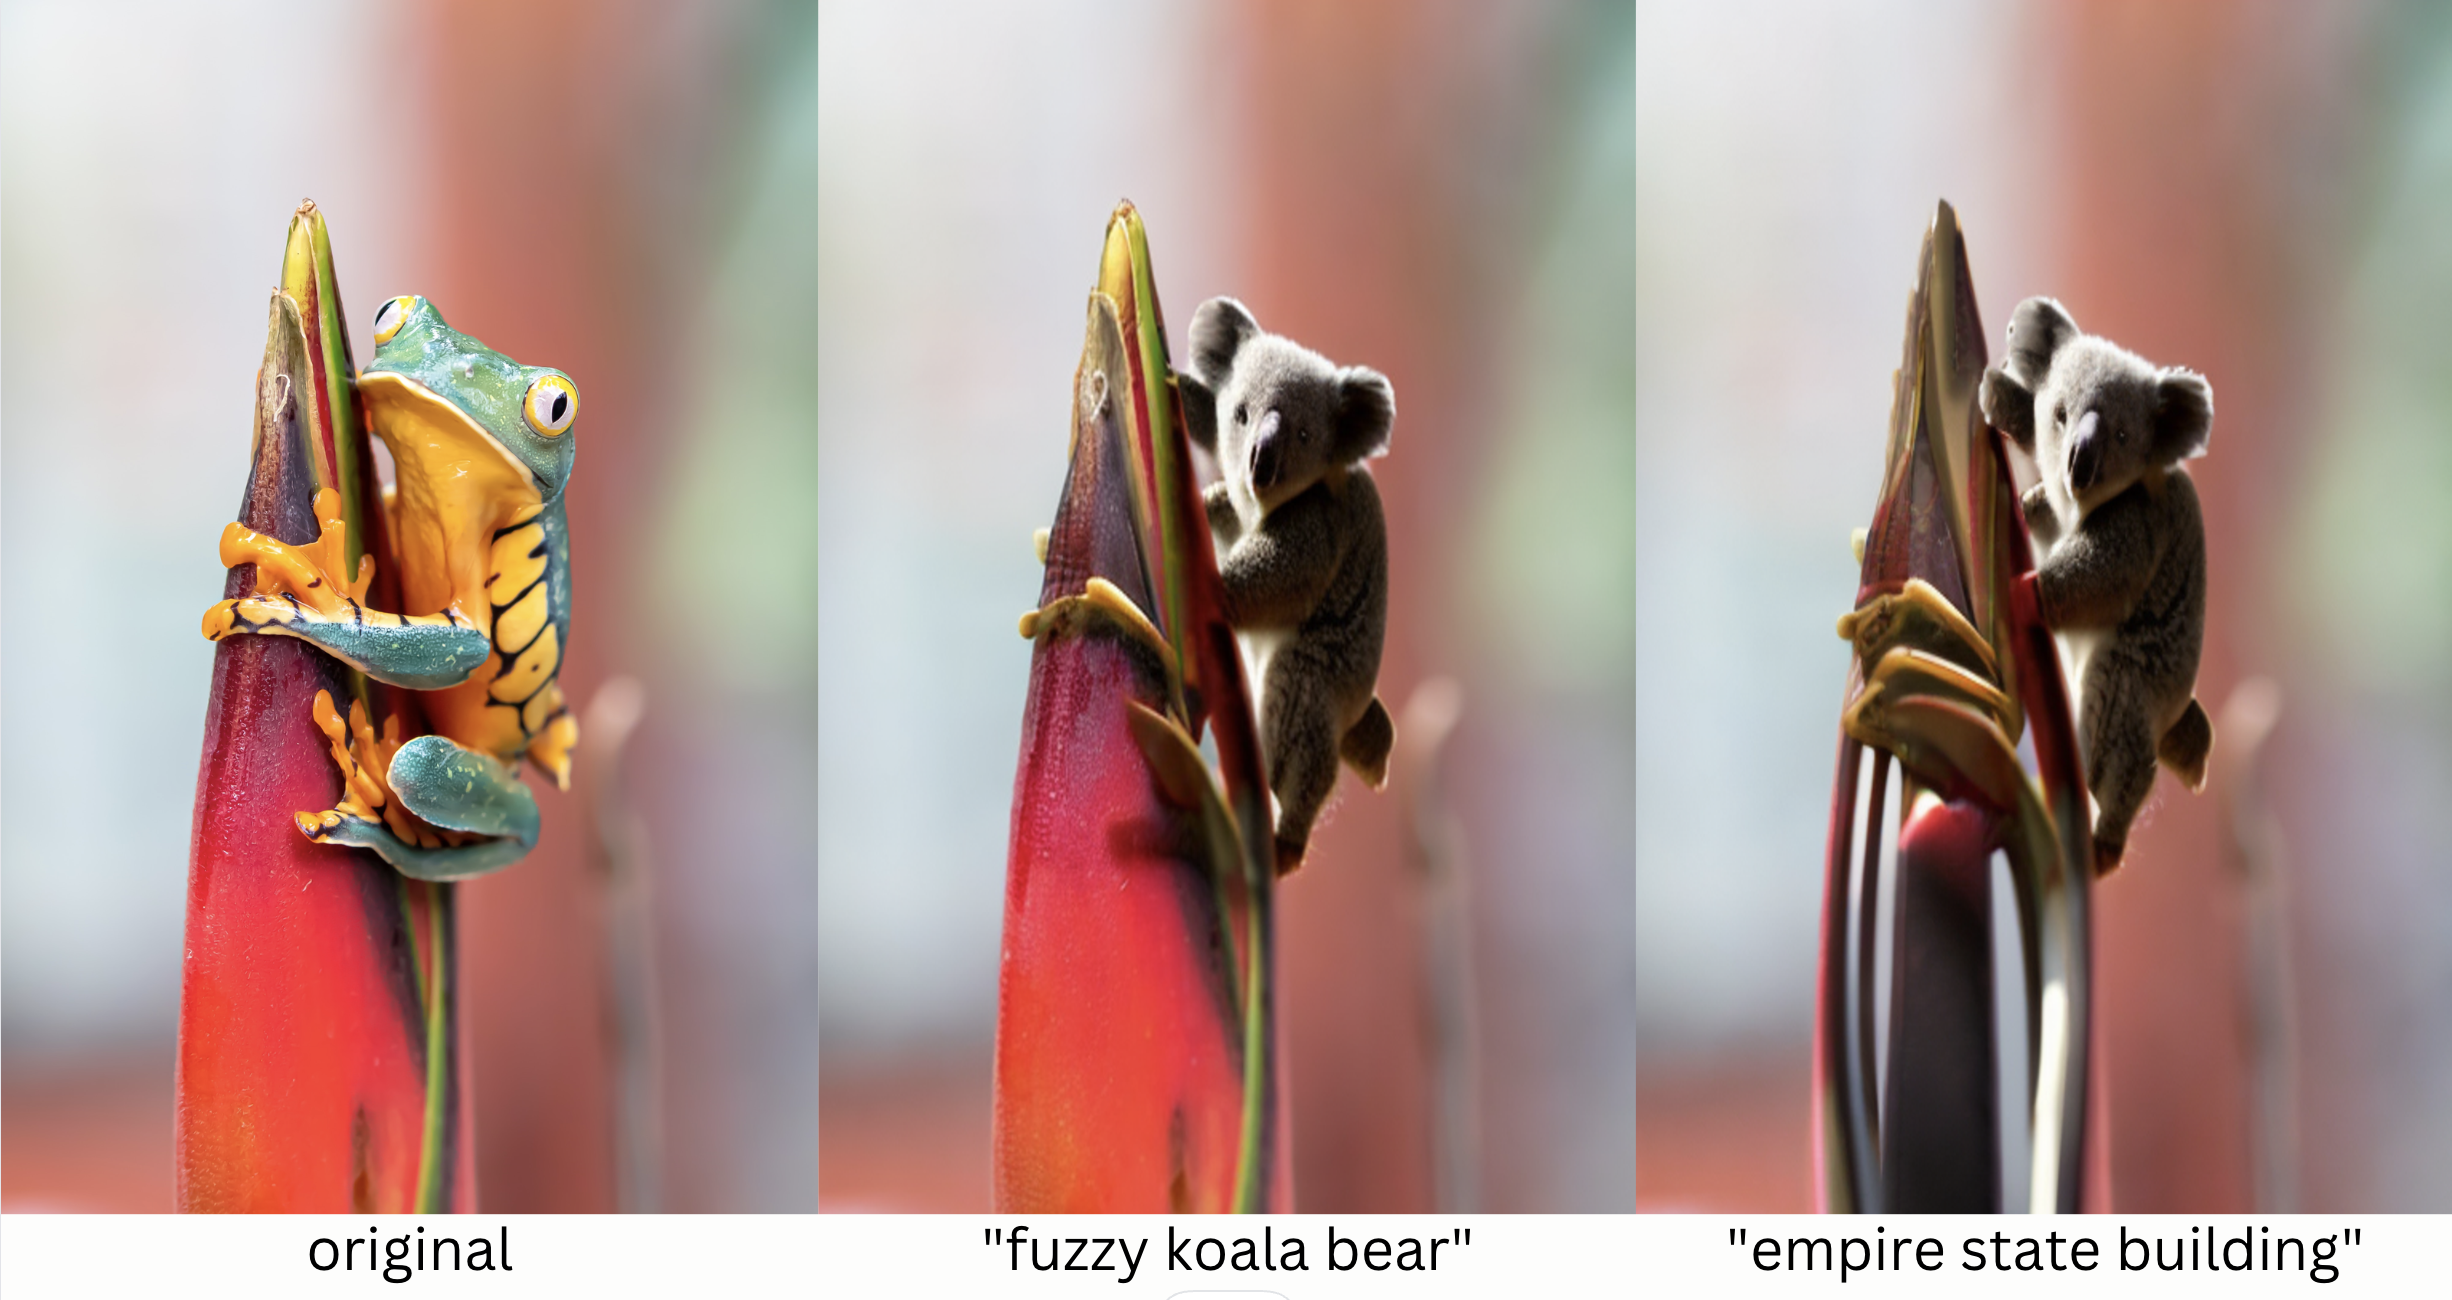 Three images in a row. The first is a tropical frog, the second replaces the frog with a koala bear using generative AI, and the third rreplaces the flower with a skyscraper (the Empire State Building) using generative AI. Image made with with SAM + Stable Diffusion.